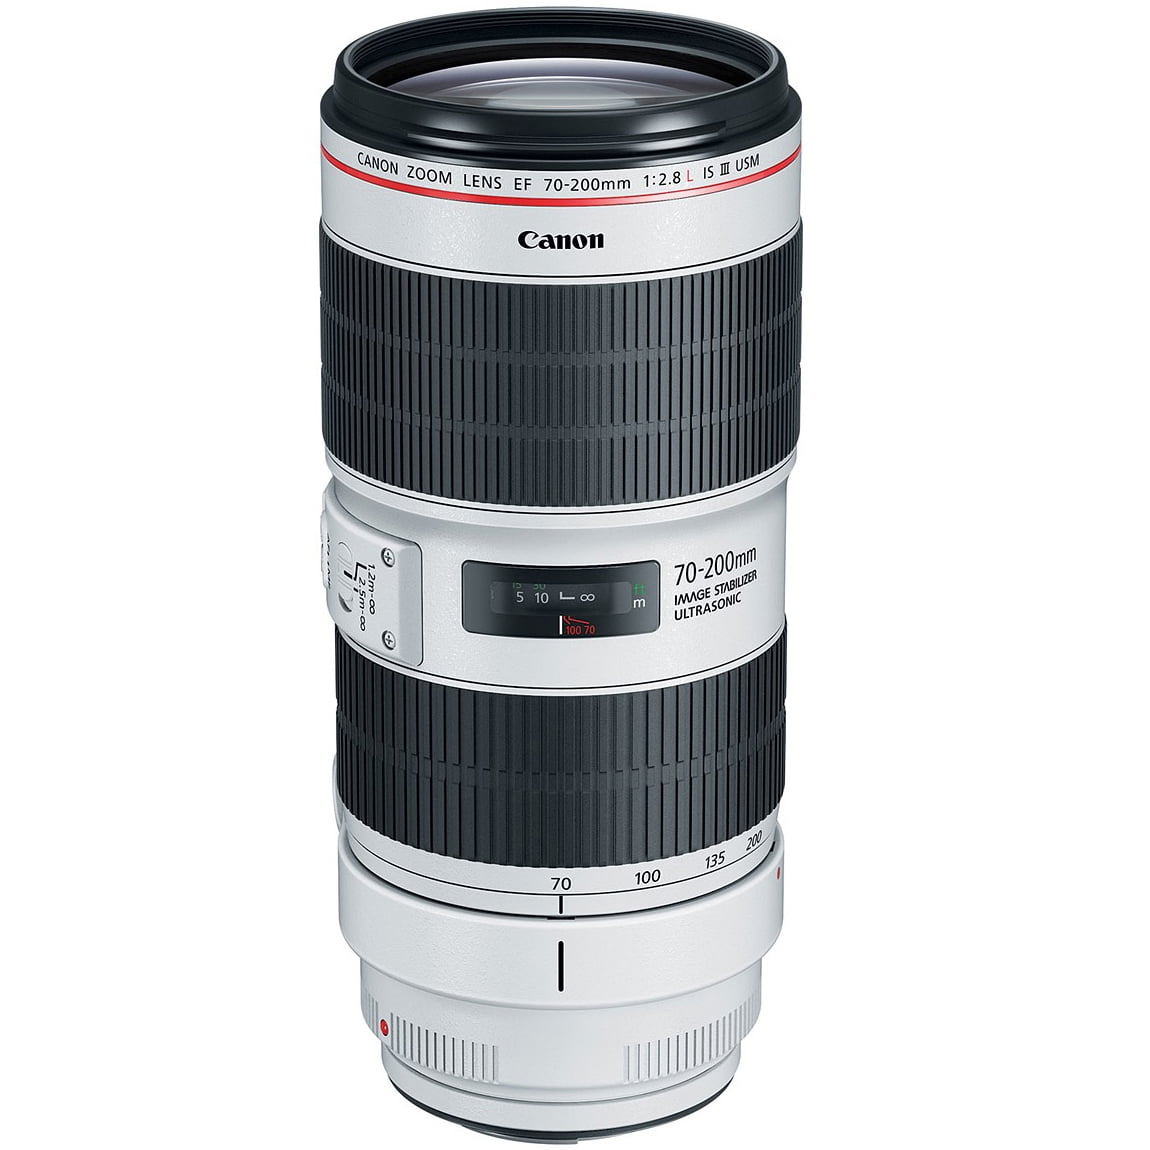 Canon EF 70-200mm f/2.8L IS III USM Telephoto Lens for Digital 